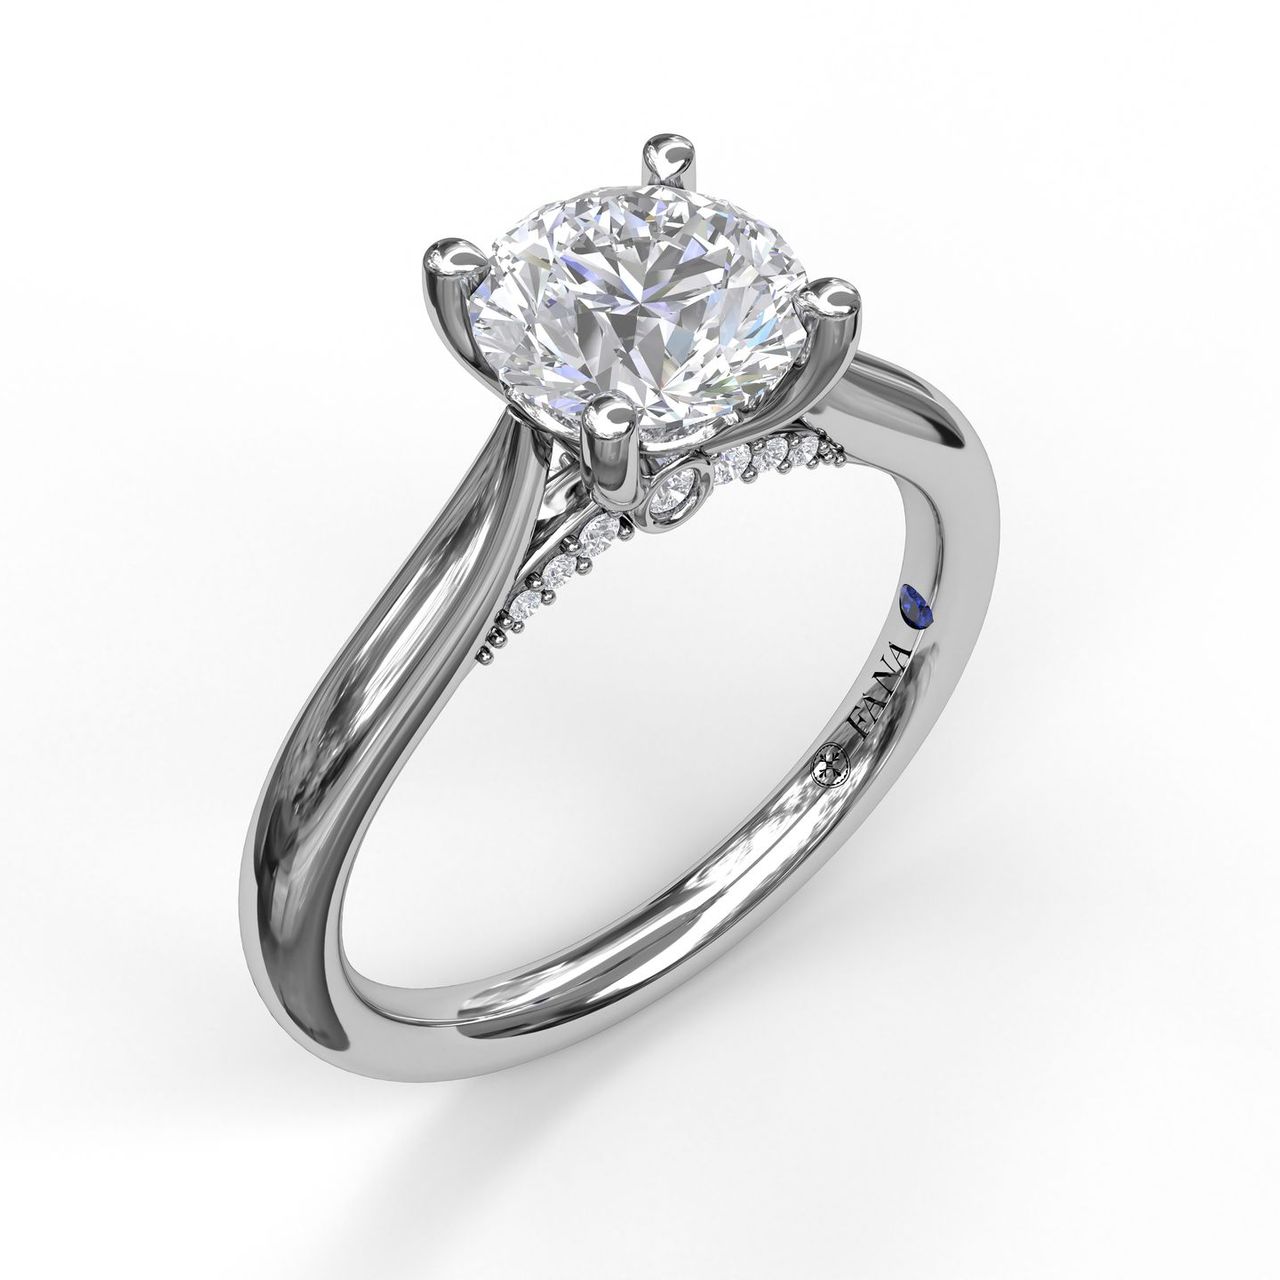 1.05CT LAB GROWN DIAMOND 14K WHITE GOLD SOLITAIRE ENGAGEMENT FANA RING